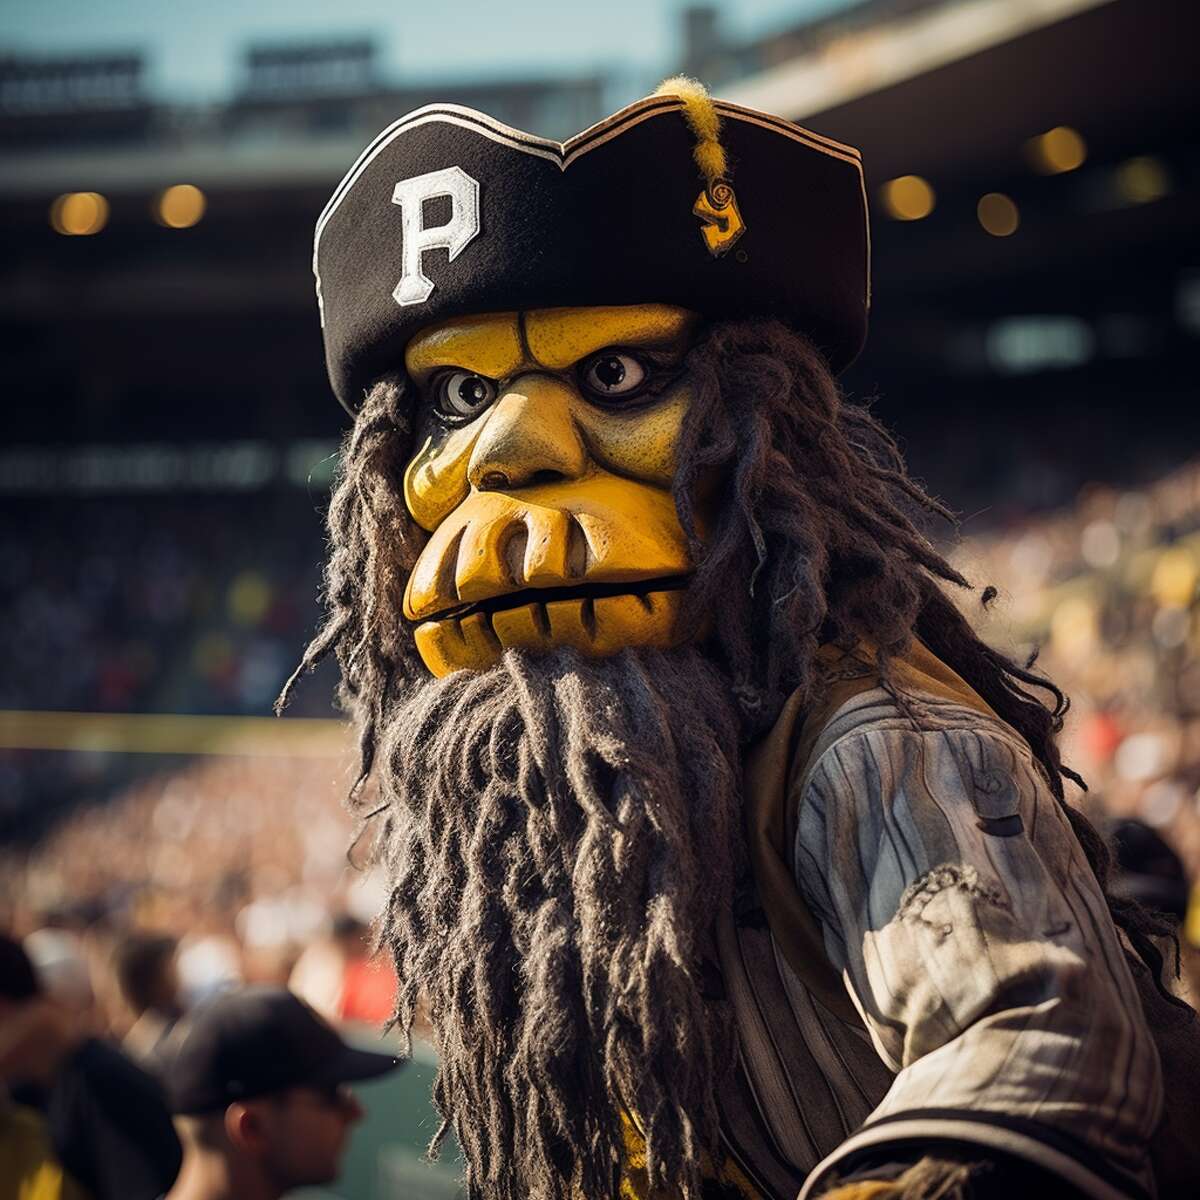 AI reimagined all 30 MLB mascots, and the results are interesting